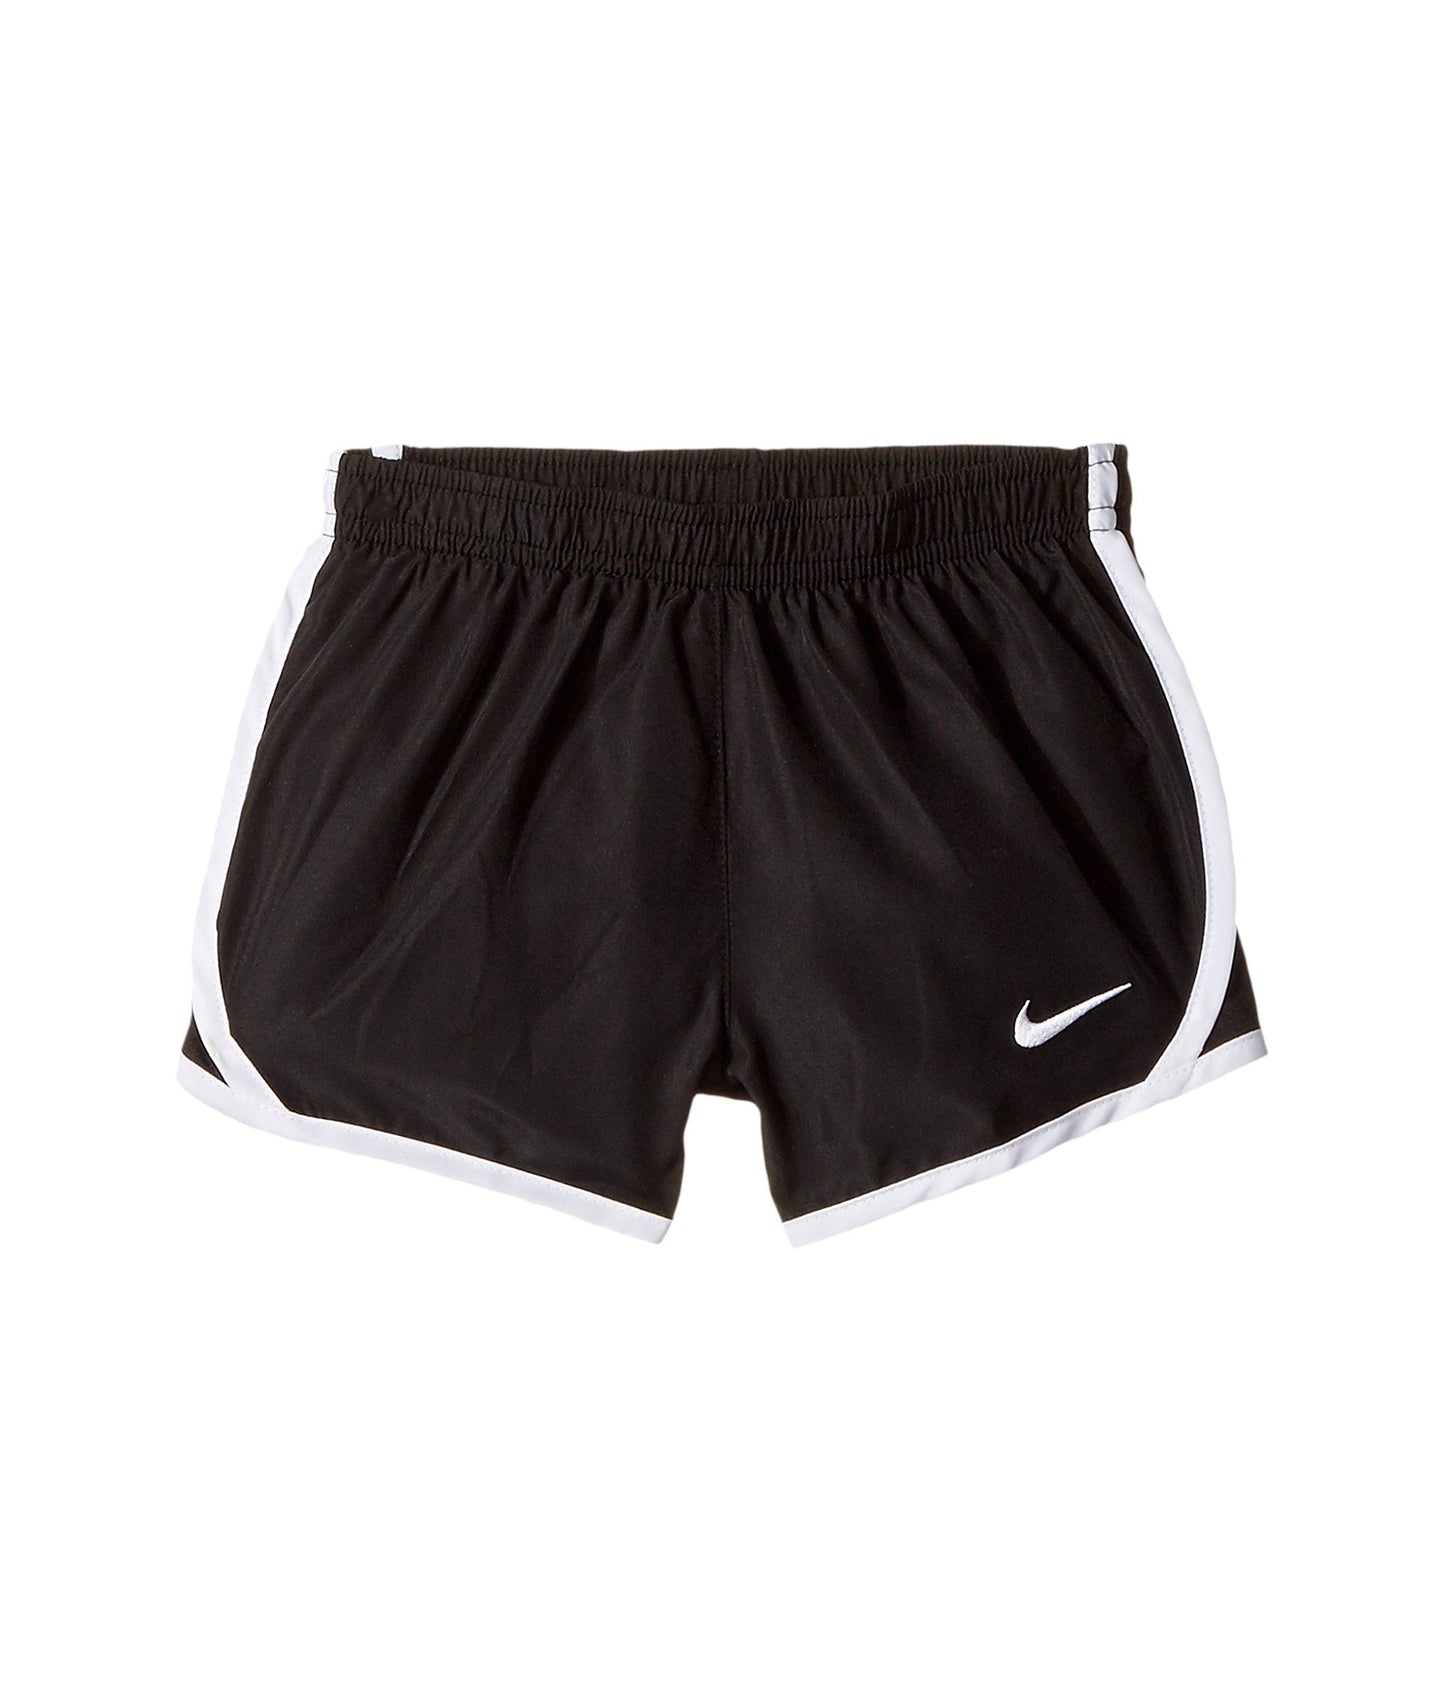 Image 1 of Tempo Short (Toddler)